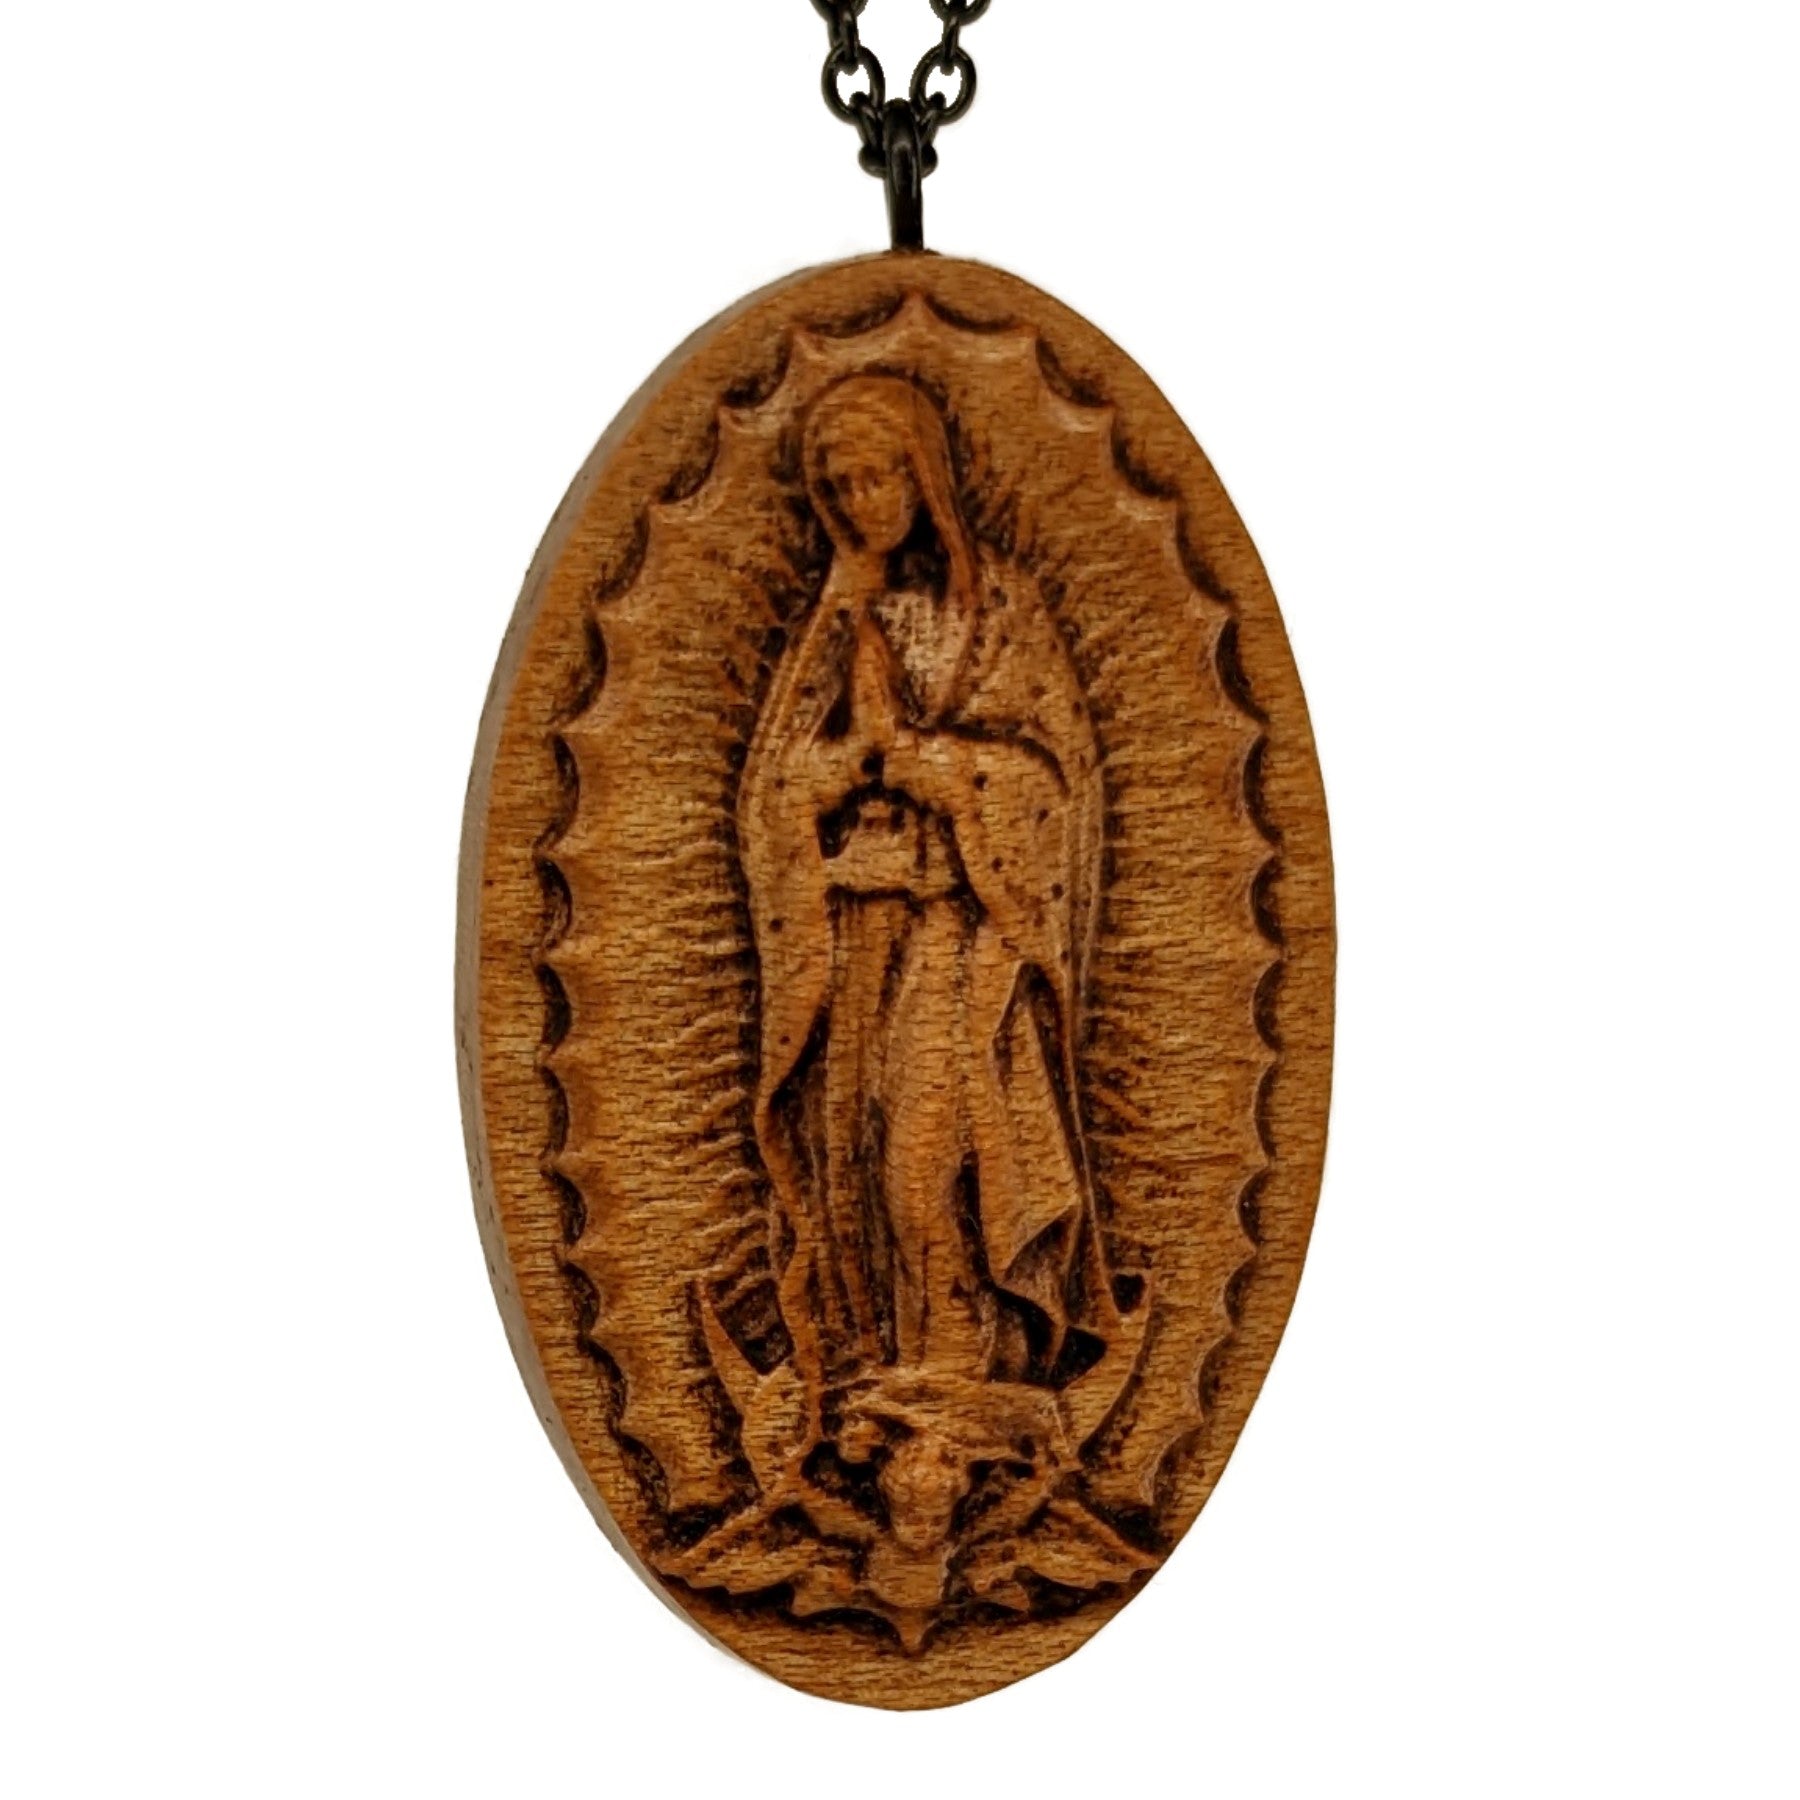 Wooden necklace pendant carved in the shape of Guadalupe. Made from hard maple and hanging from a black stainless steel chain against a white background.